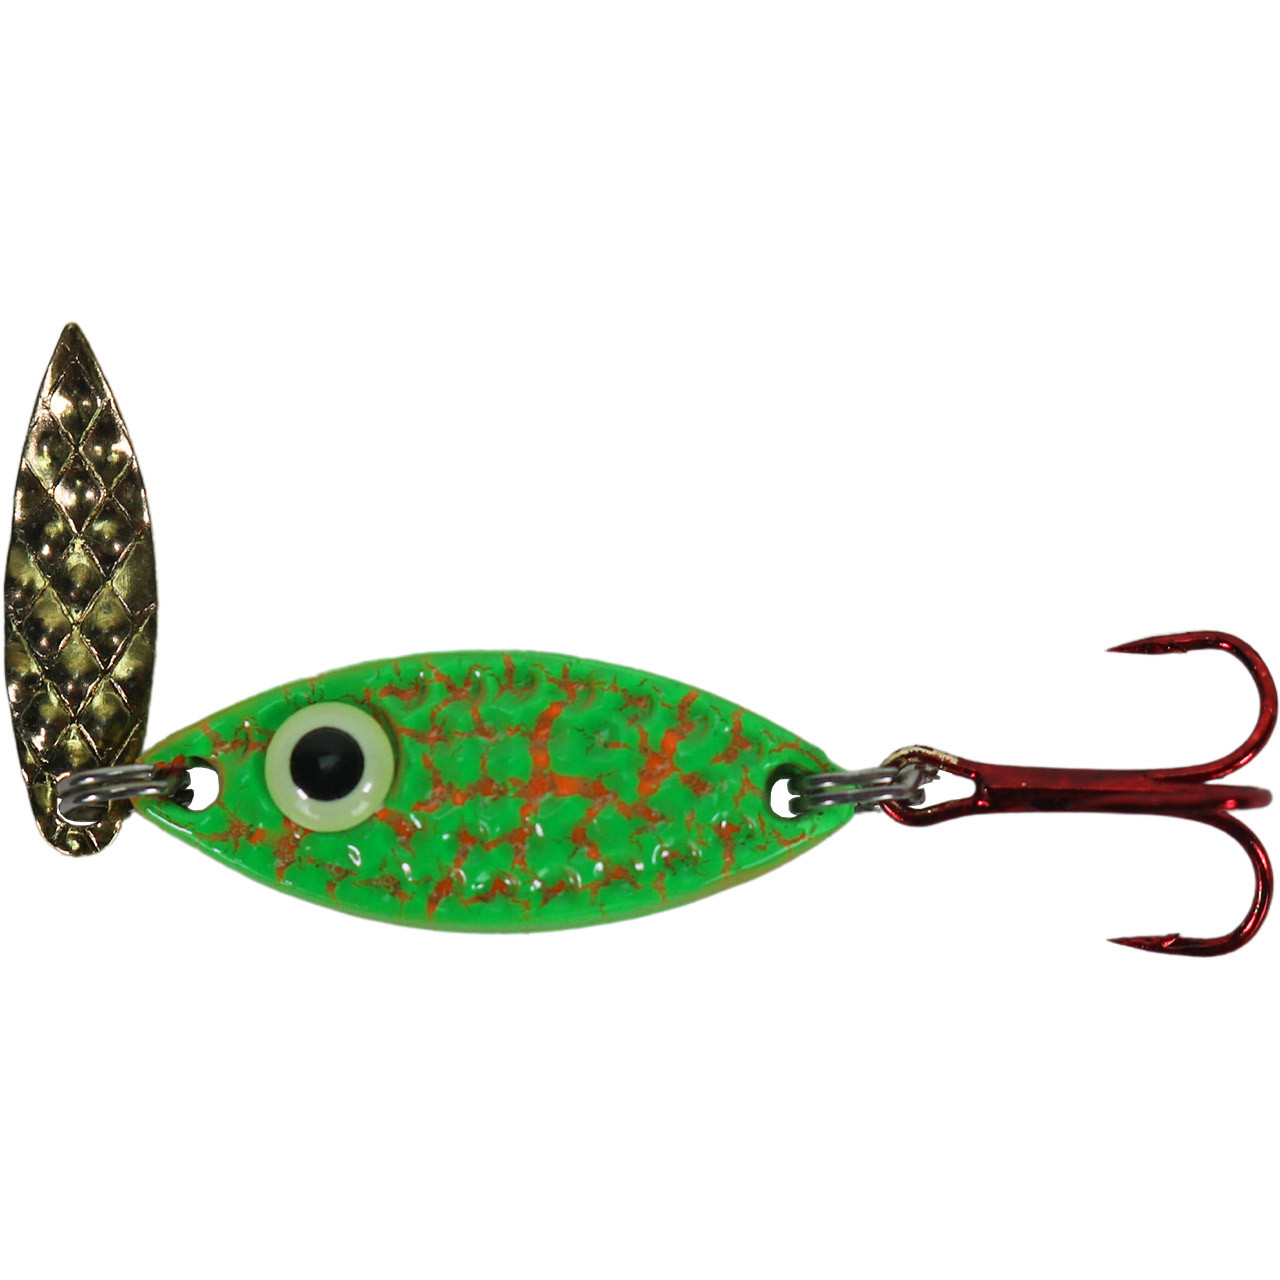 Acme Tackle / Kastmaster Rattle Glow Ice Fishing Spoon - Glow Chartreuse  Tiger/Gold Back